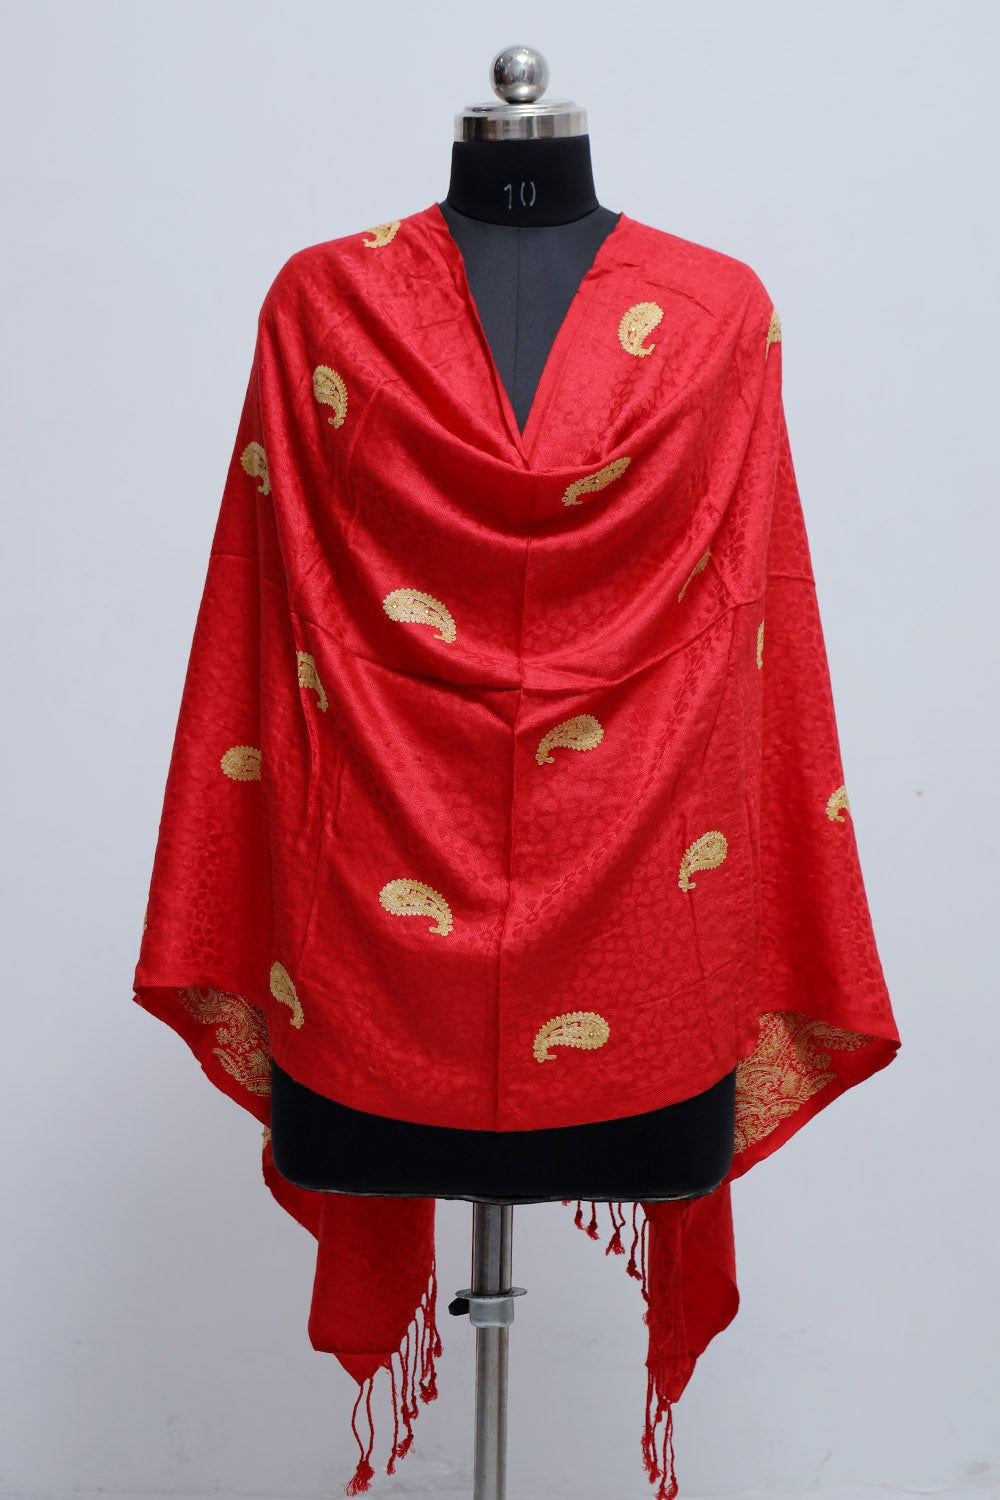 Ravishing Red Colour Stole Enriched With Aari Embroidery